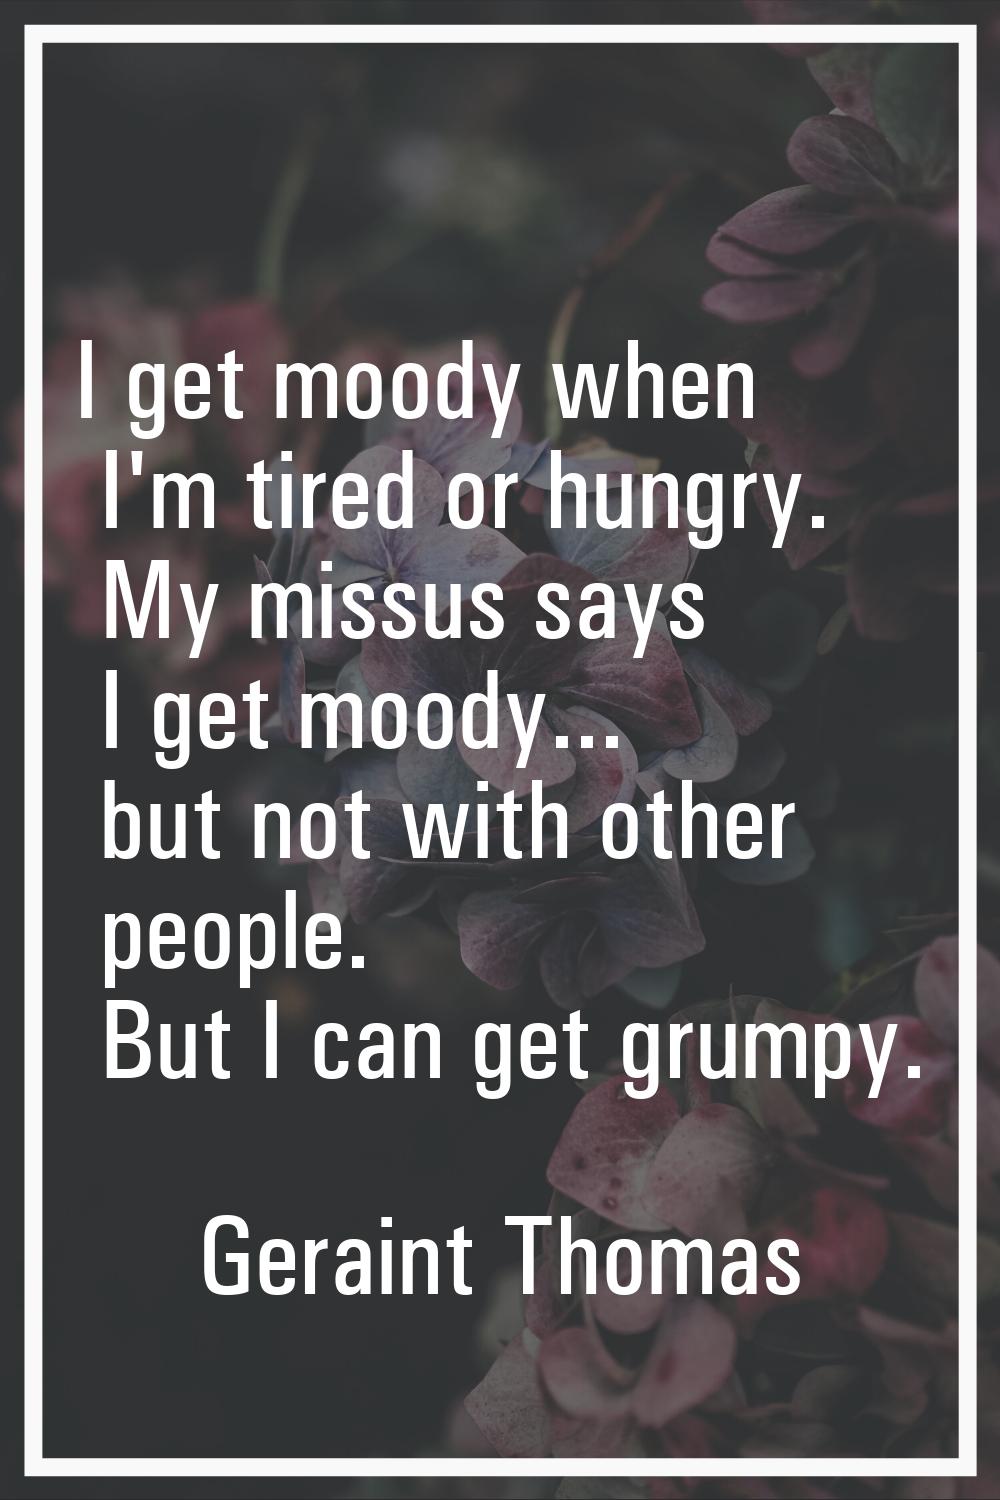 I get moody when I'm tired or hungry. My missus says I get moody... but not with other people. But 